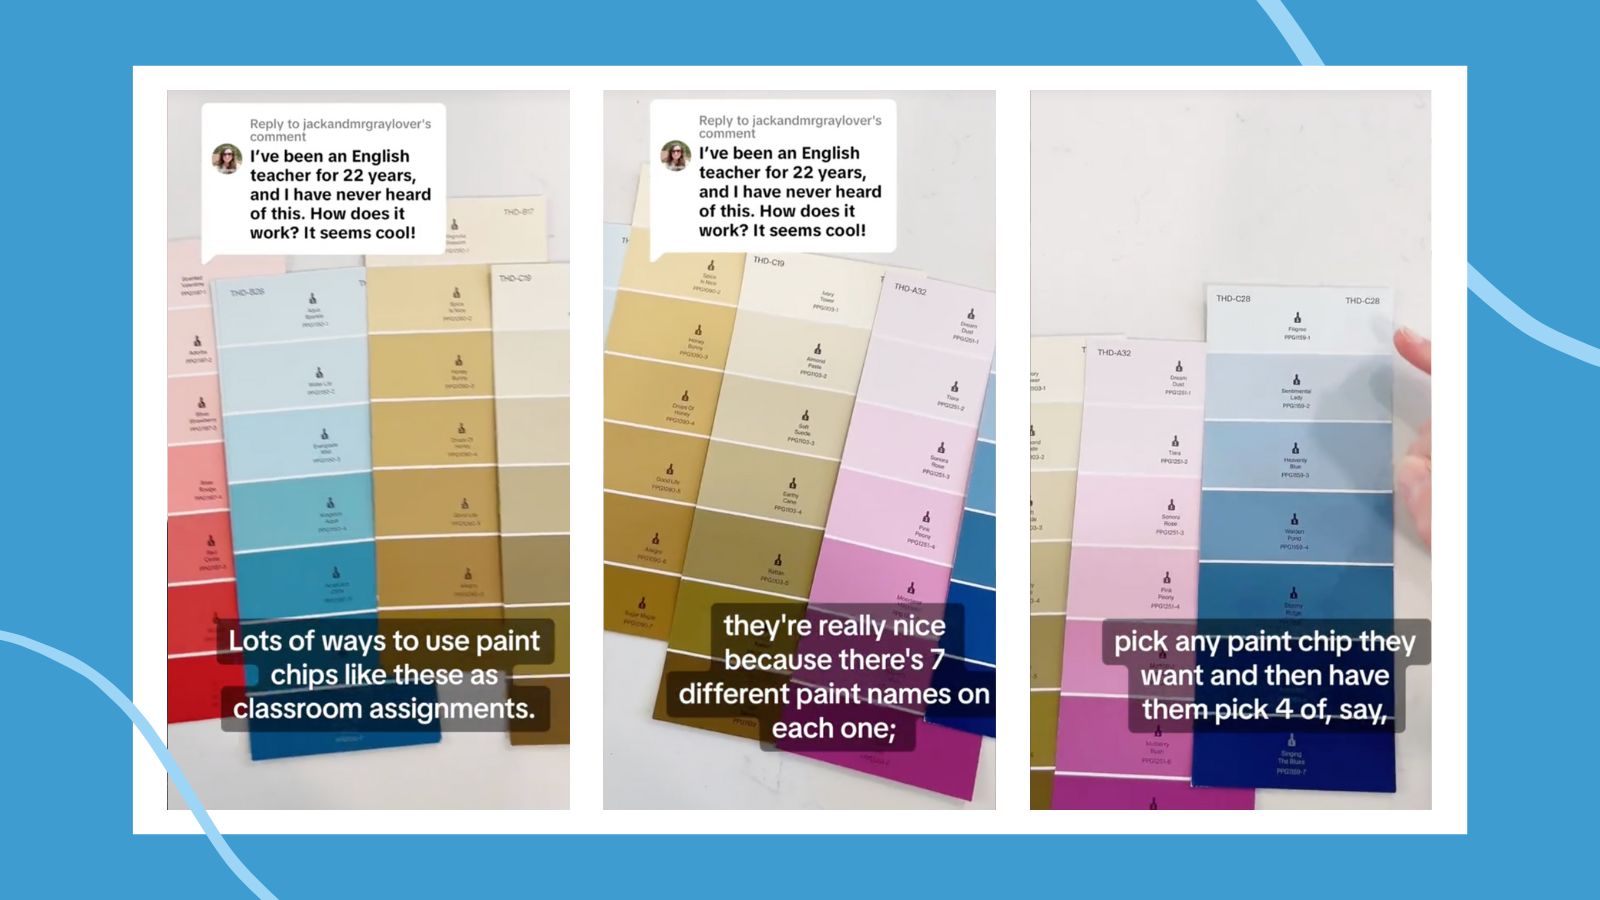 Screenshots from TikTok about paint samples teaching strategy